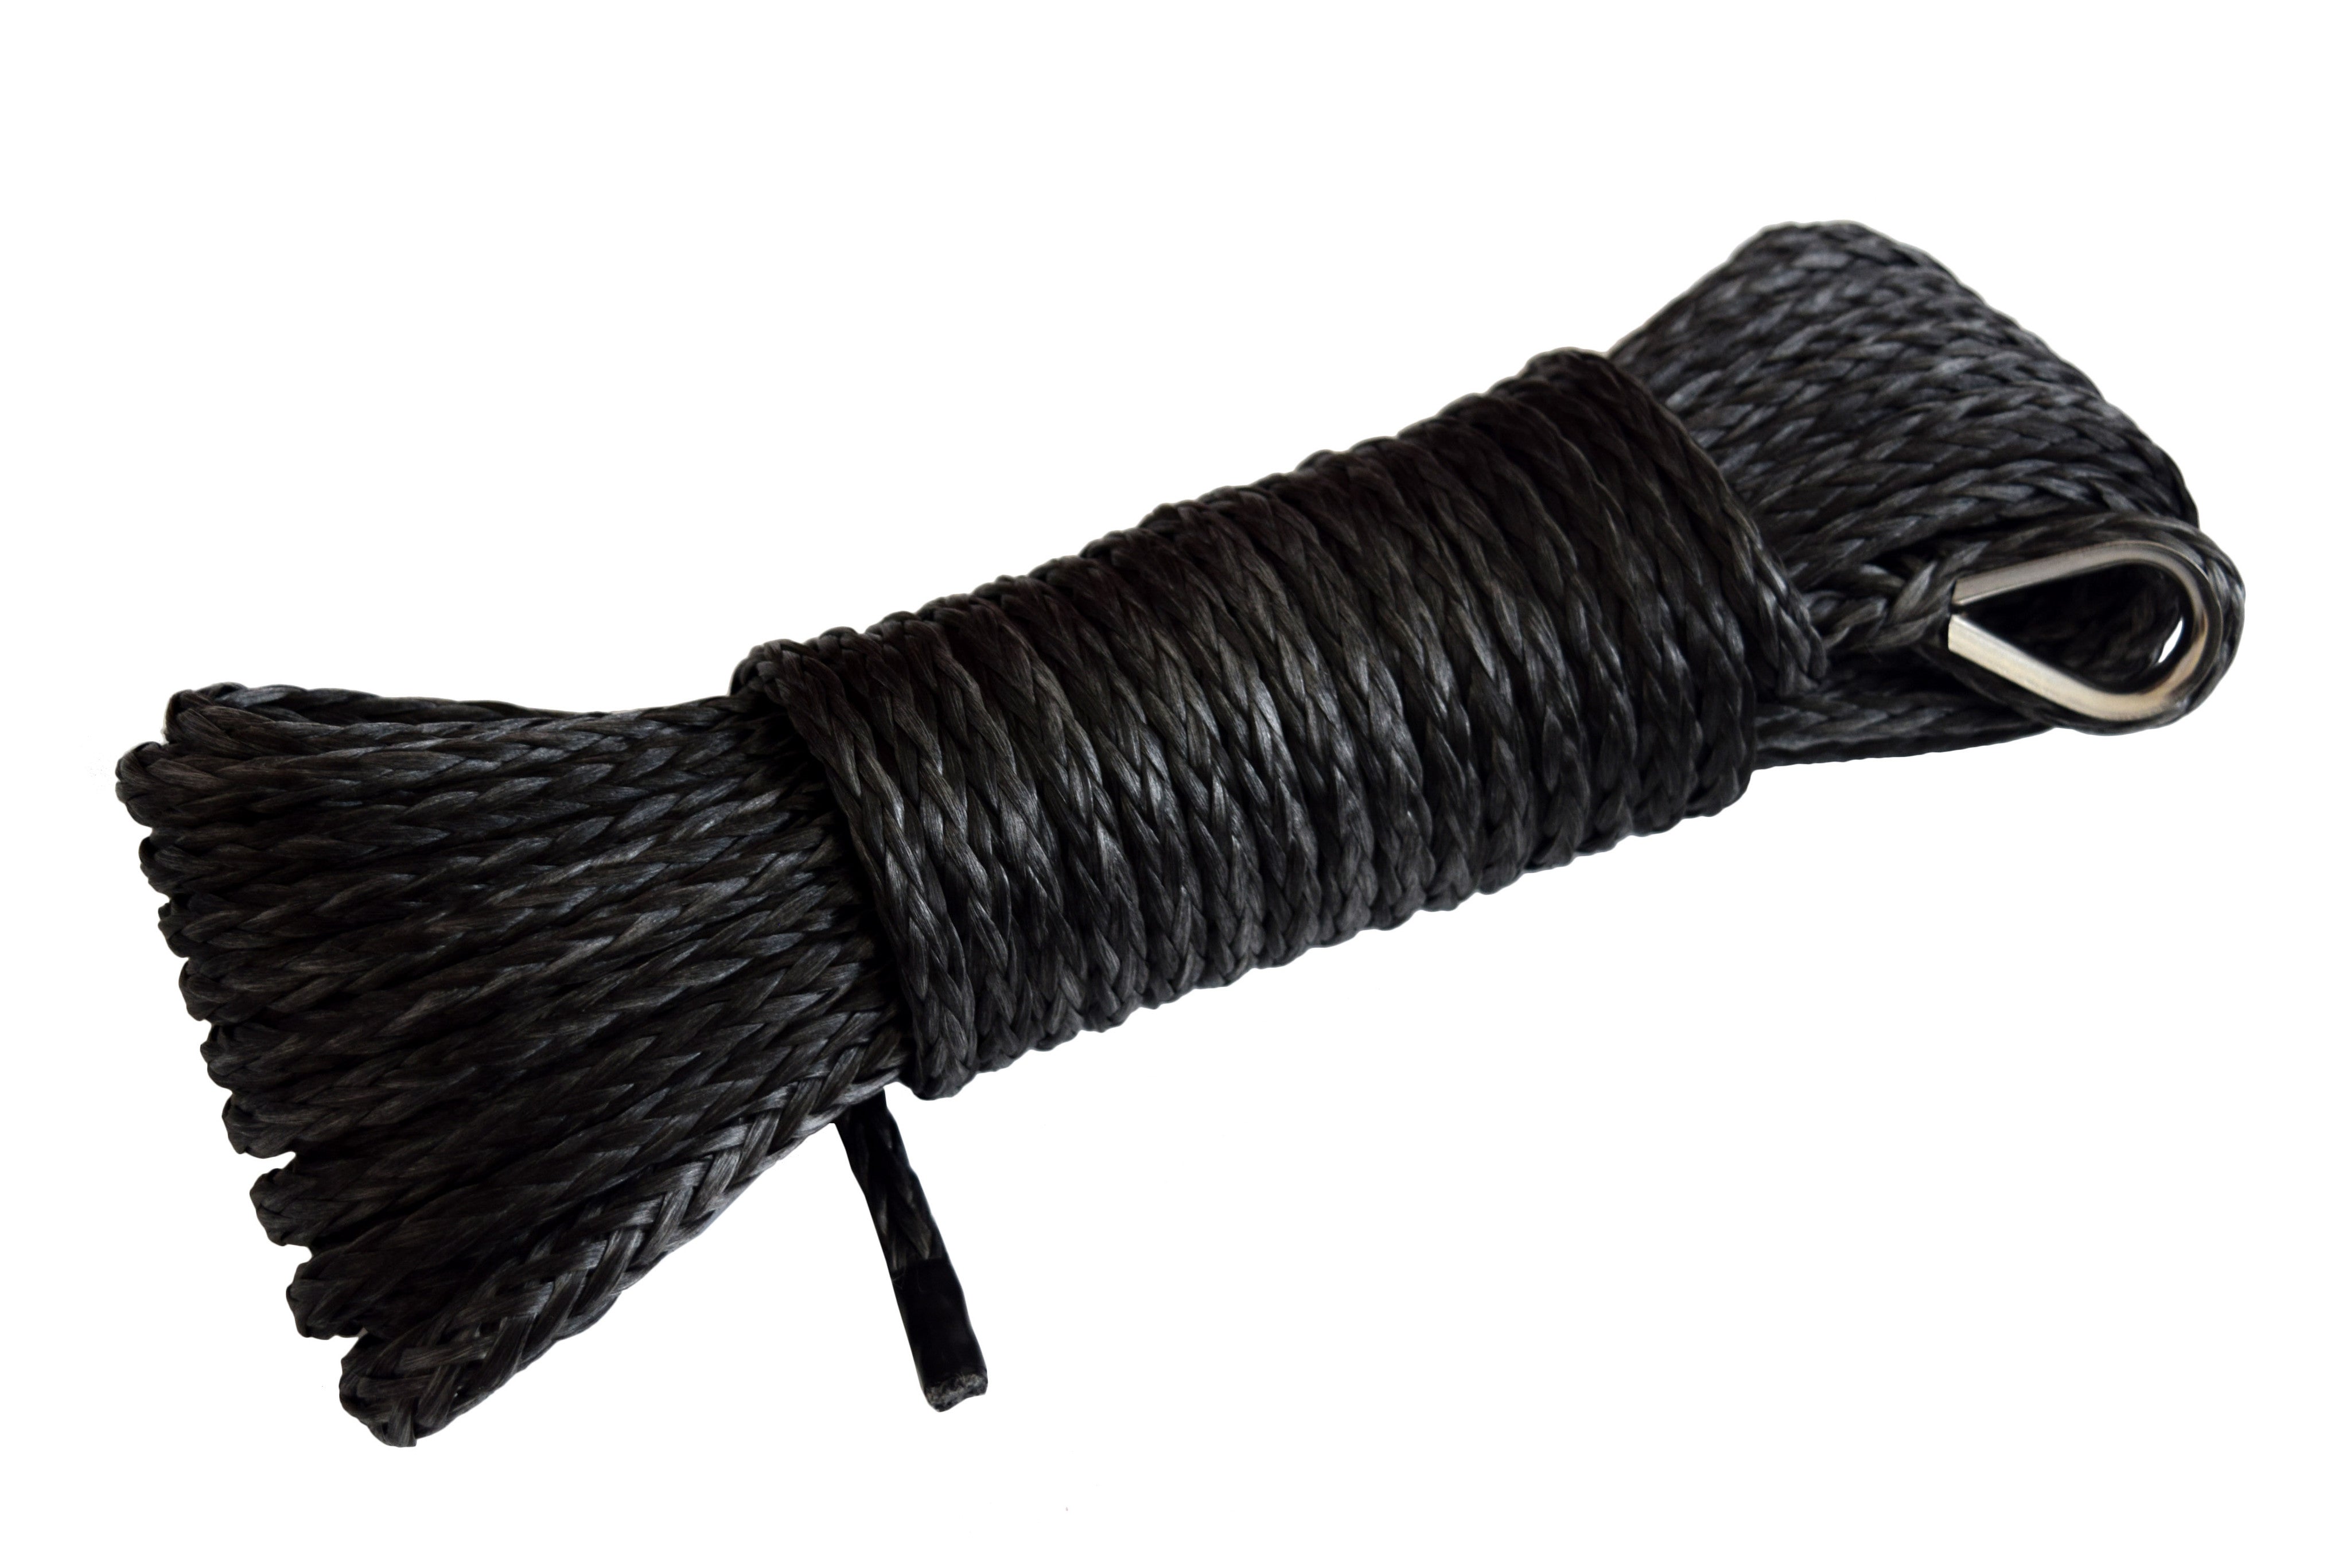 Black 50ft 1/4 inch ATV UTV synthetic winch cable rope line with thimble